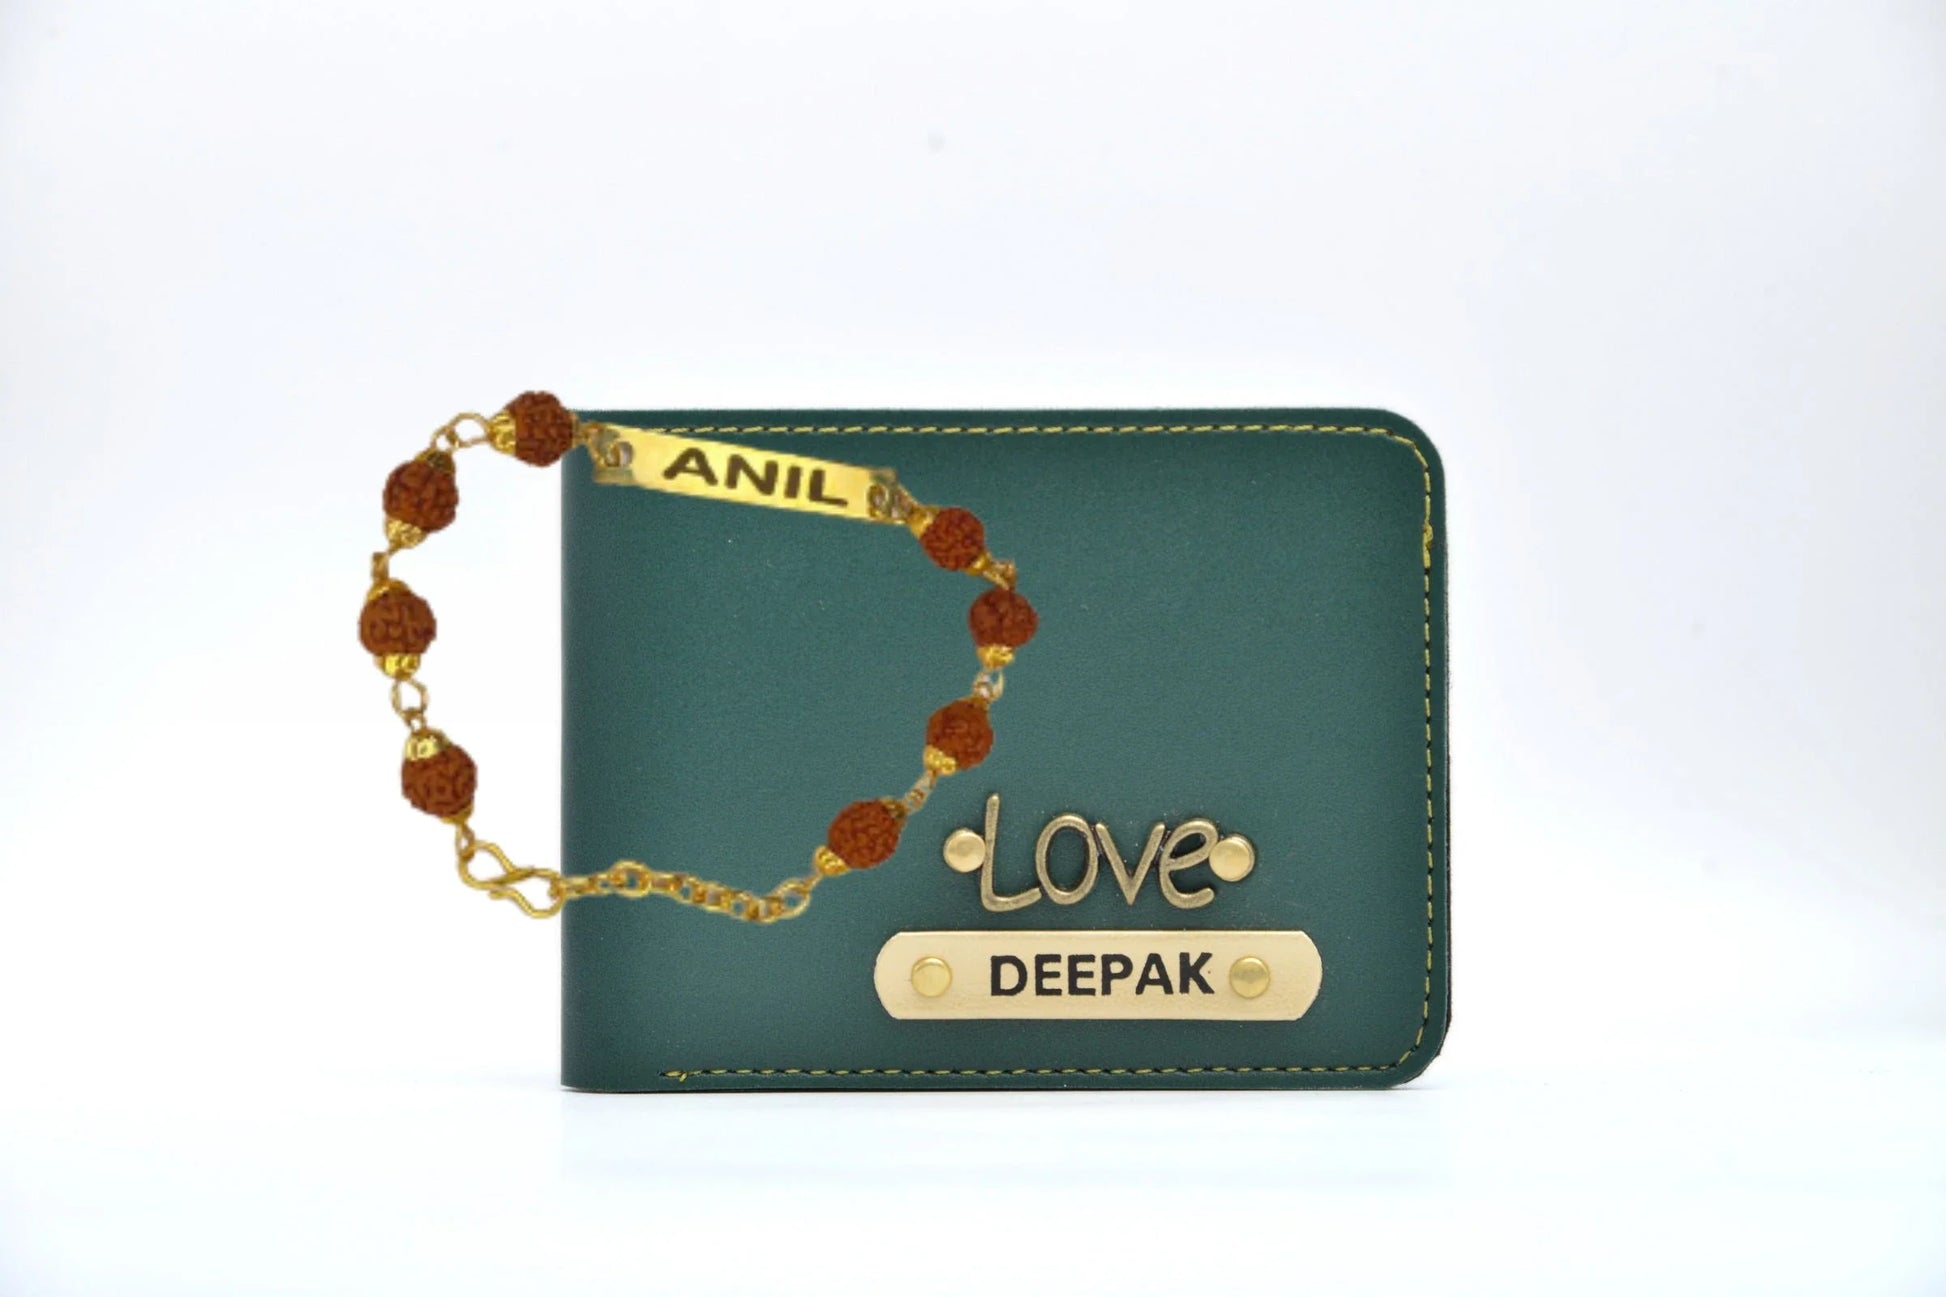 Brother's Personalized Wallet & Free Rakhi - Grey - Your Gift Studio